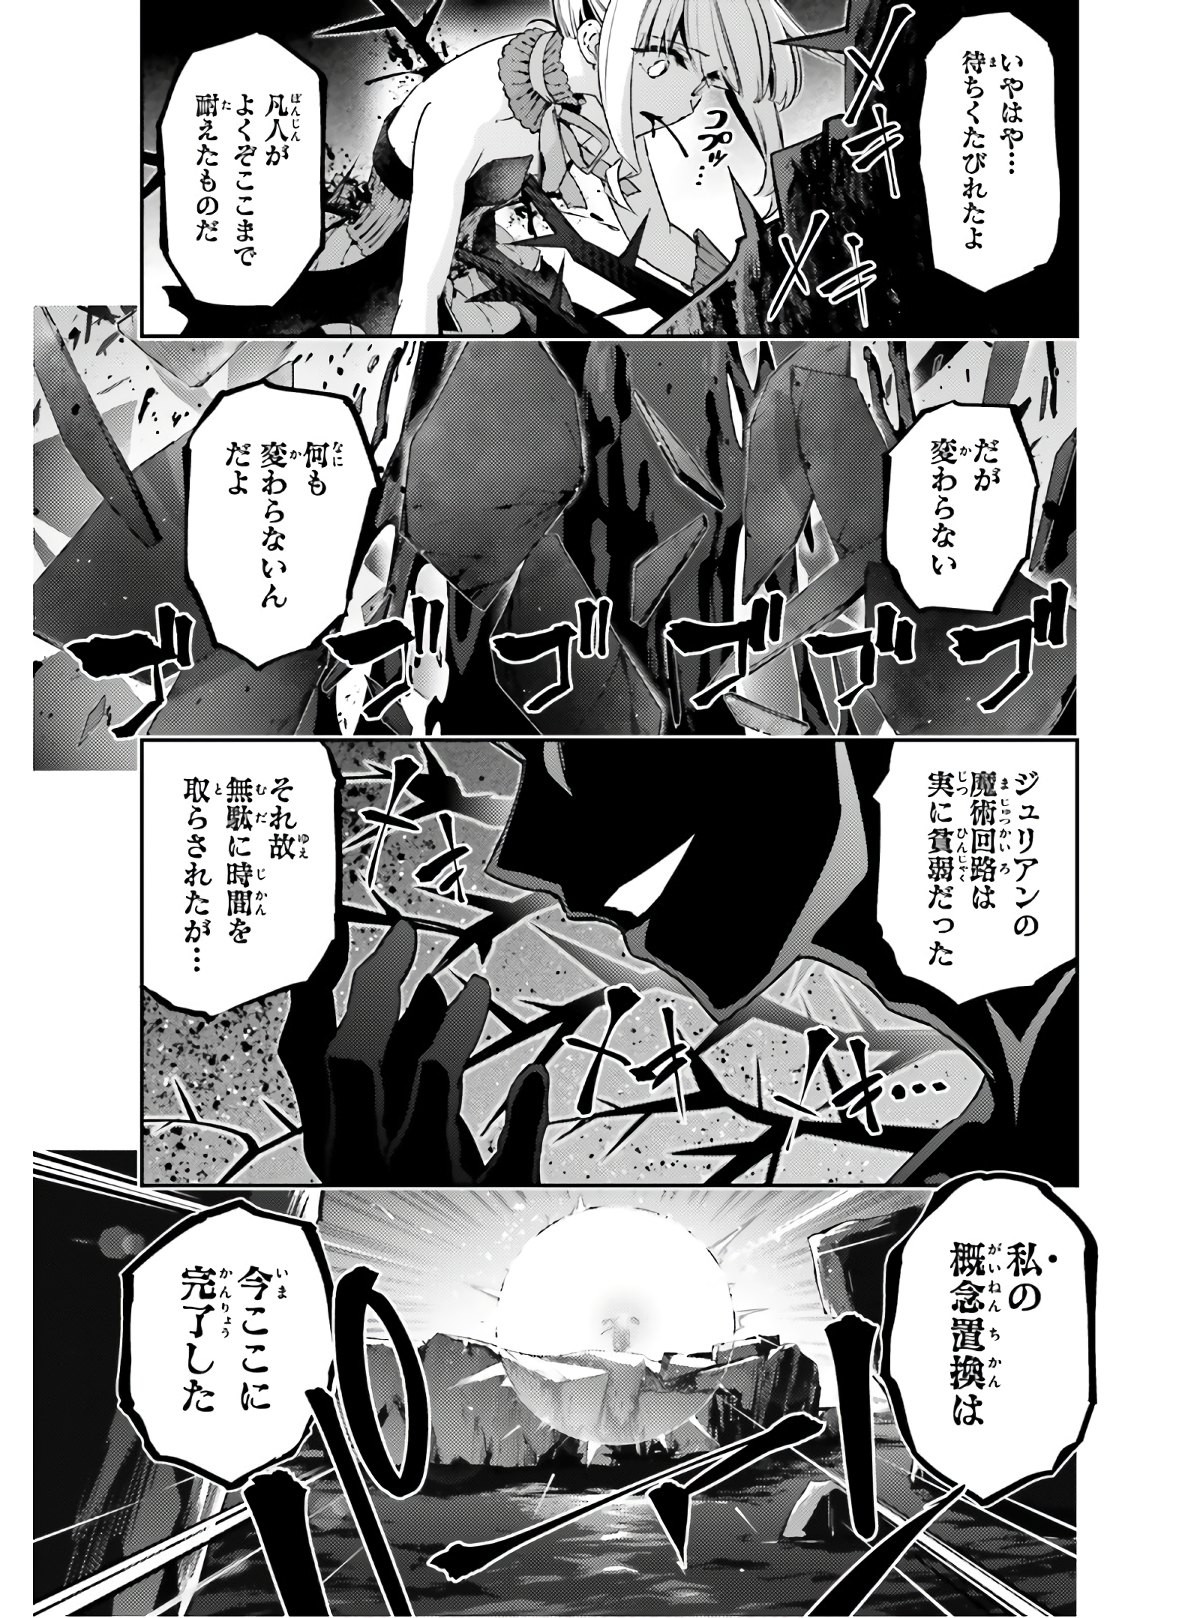 Fate/Kaleid Liner Prisma Illya Drei! - Chapter 57-2 - Page 11